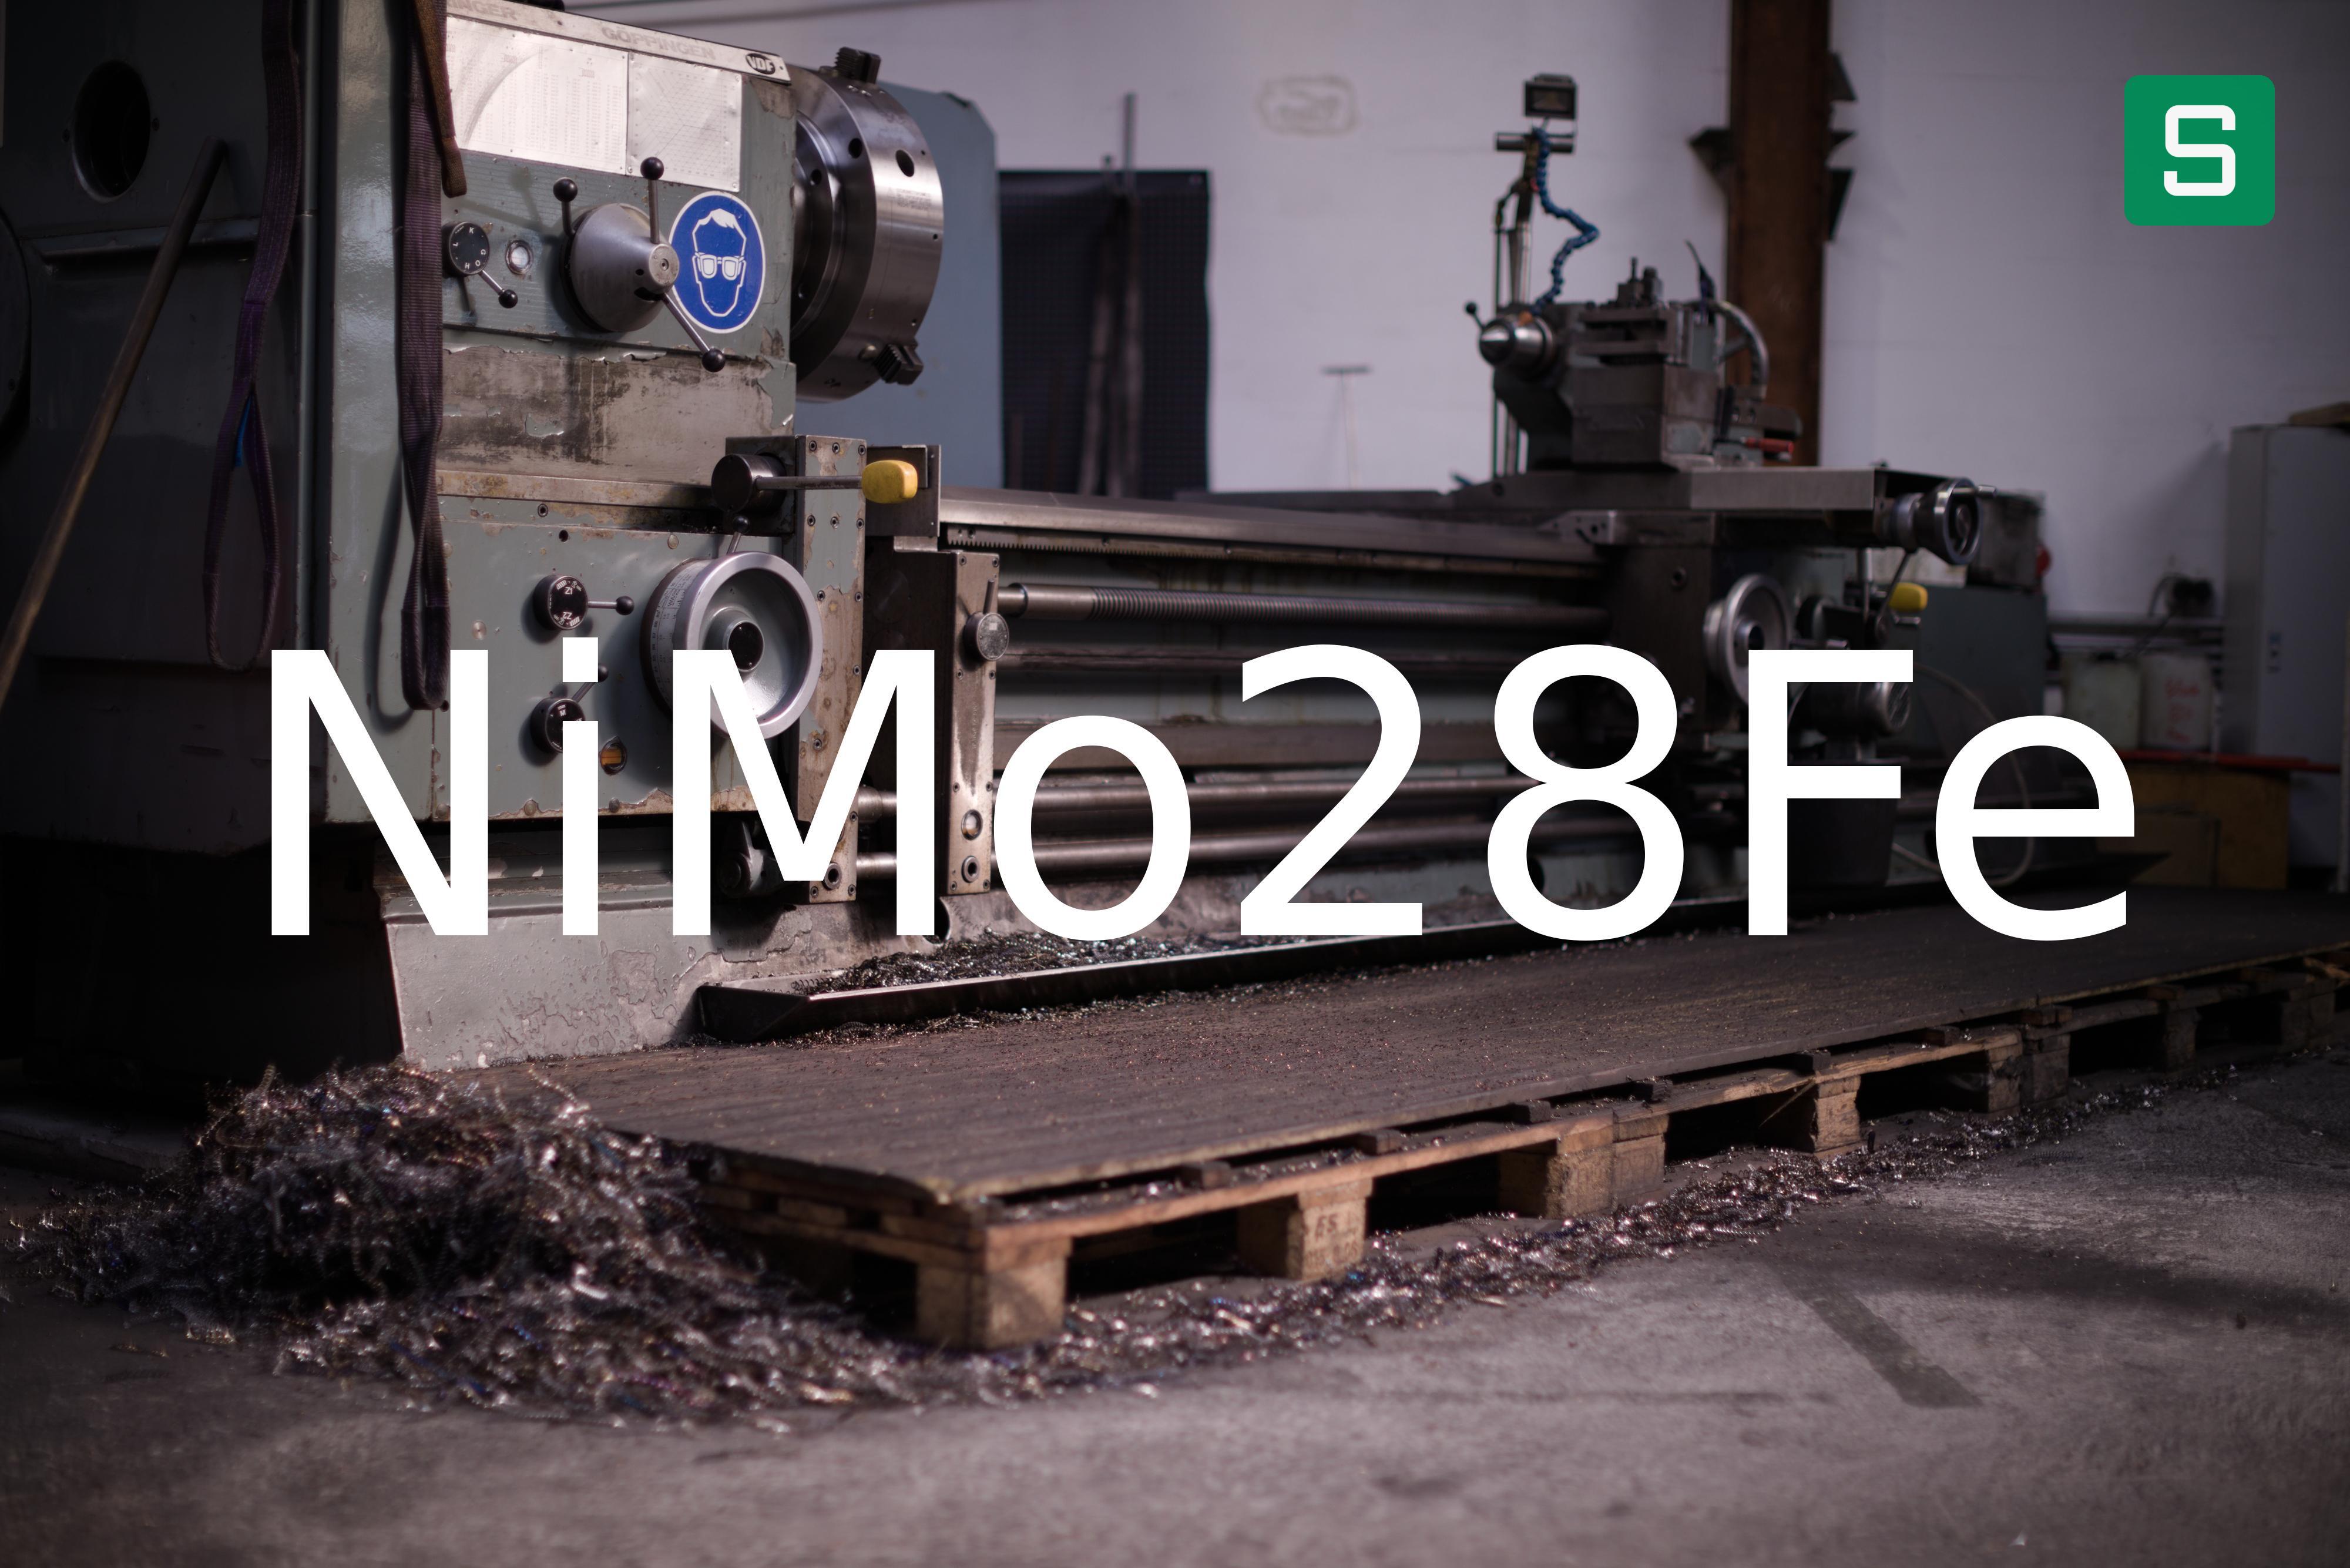 Steel Material: NiMo28Fe